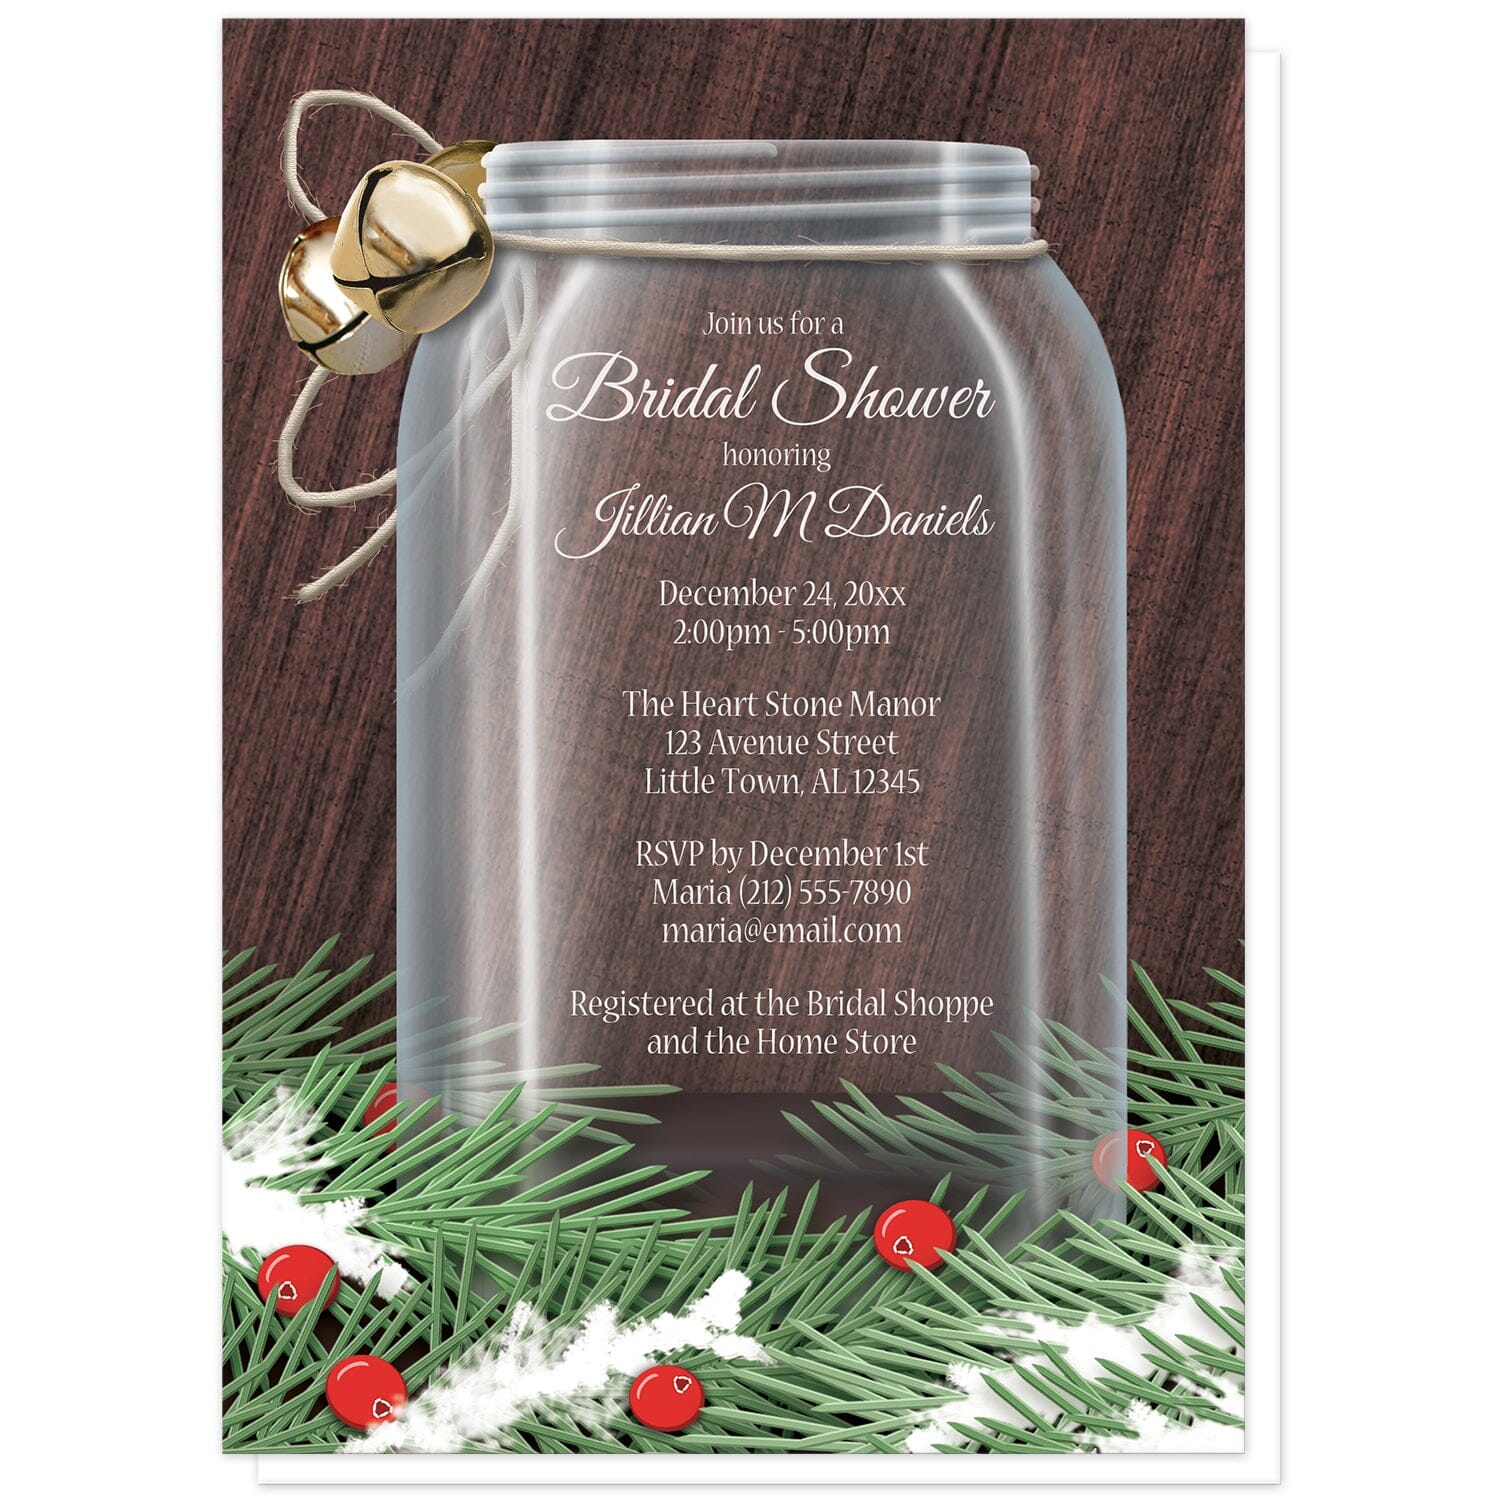 Winter Mason Jar Pine Boughs Bridal Shower Invitations at Artistically Invited. Rustic holiday-themed winter mason jar pine boughs bridal shower invitations designed with a glass mason jar illustration with twine and jingle bells tied around the top of the jar and pine boughs and cranberries along the bottom over a dark wood design. Your personalized bridal shower celebration details are custom printed in white over the mason jar area of the design.